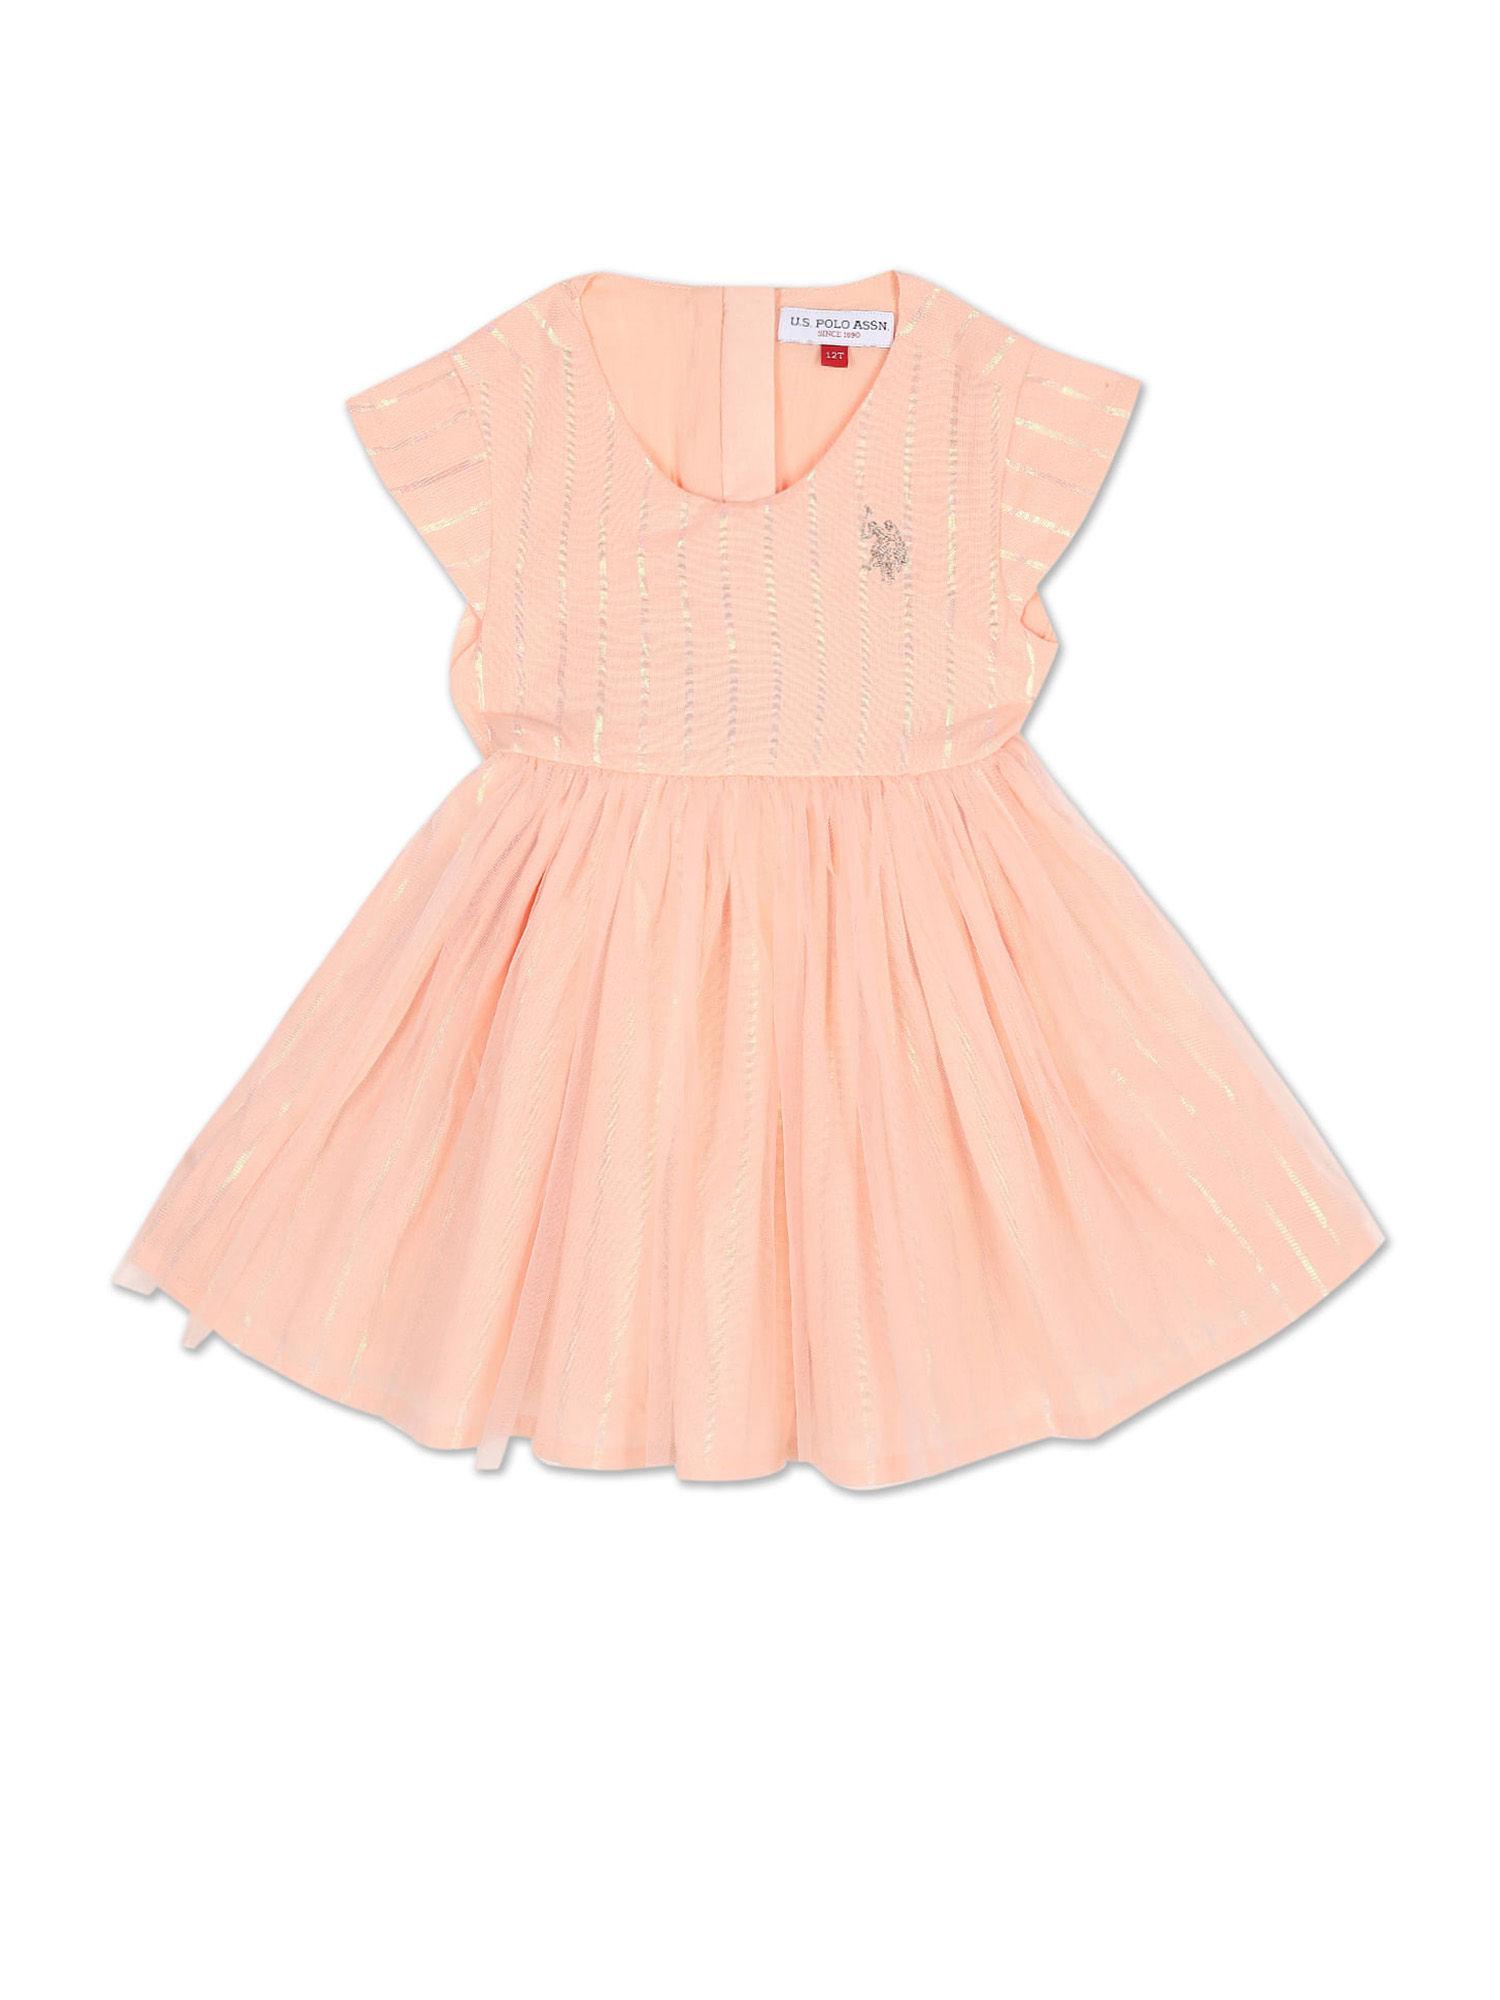 girls-peach-cap-sleeve-stripes-fit-and-flare-dress